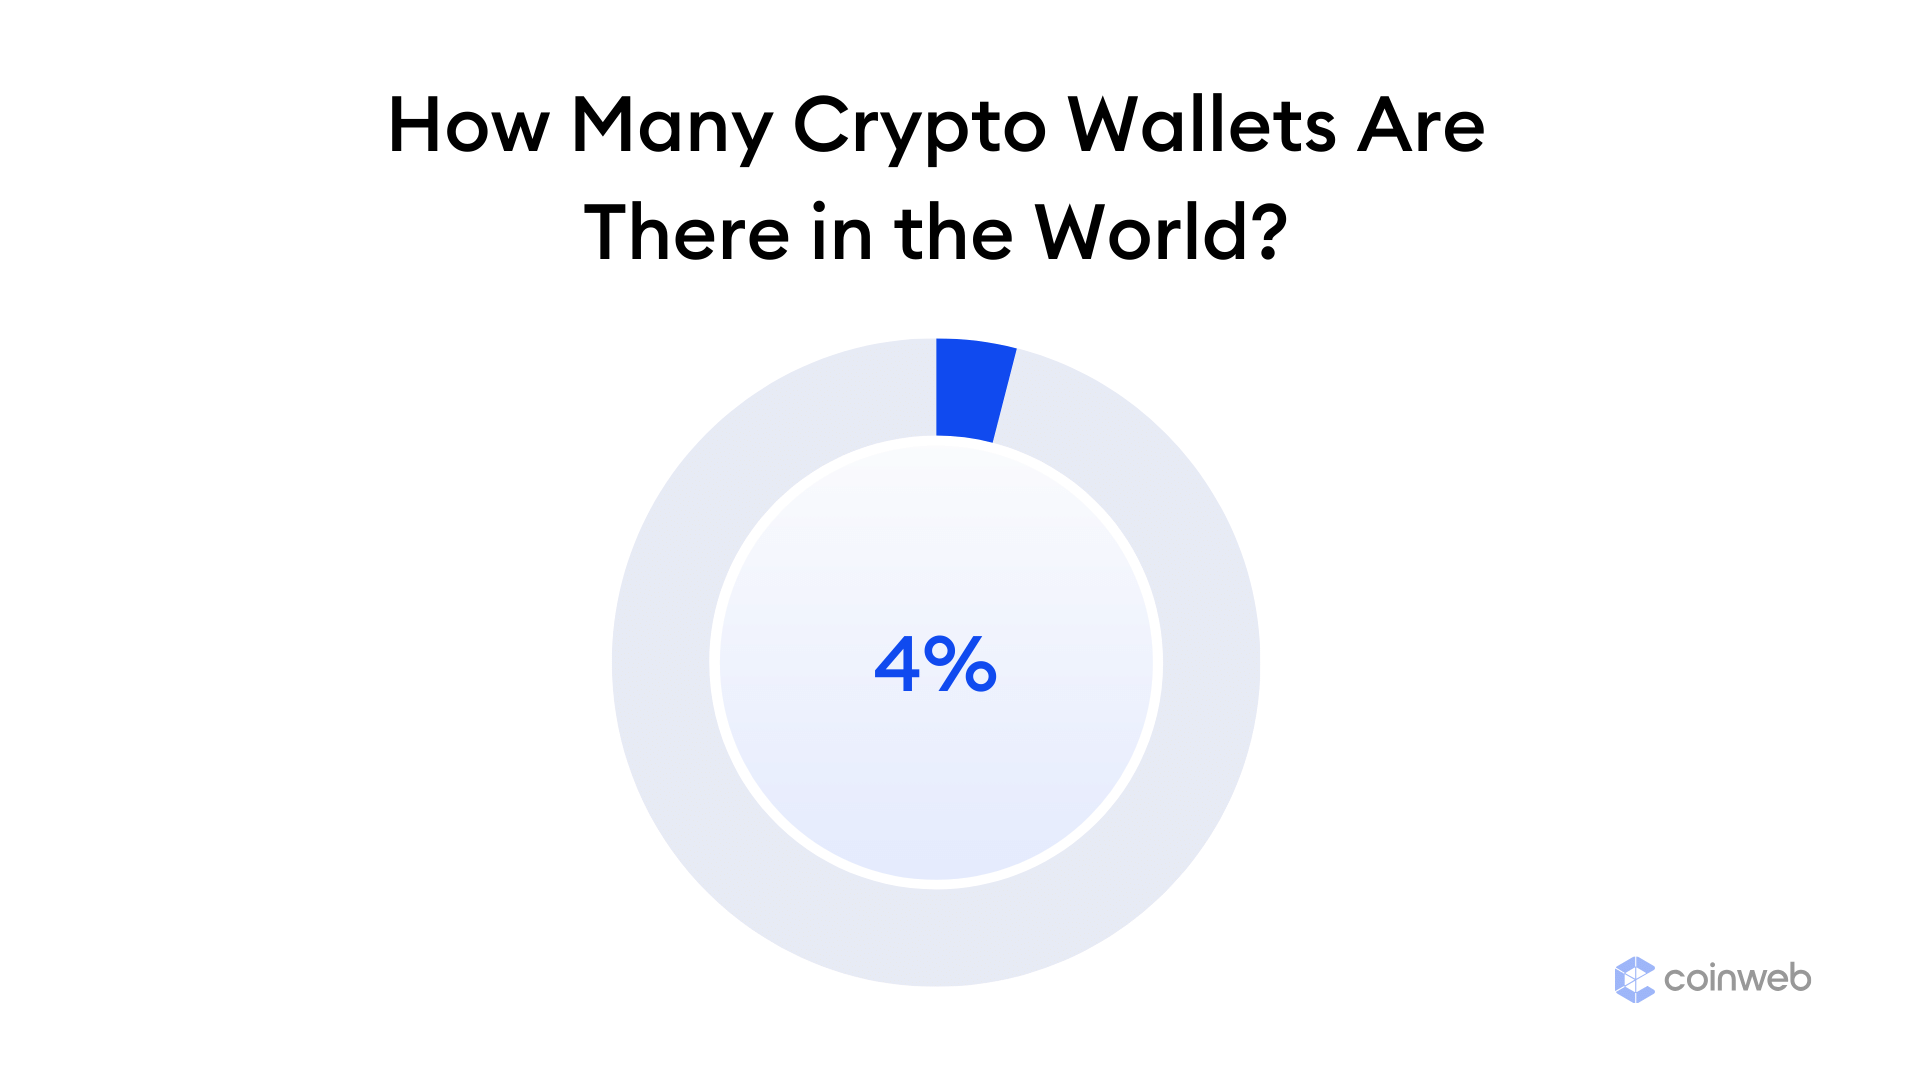 Cryptocurrency wallet downloads | Statista